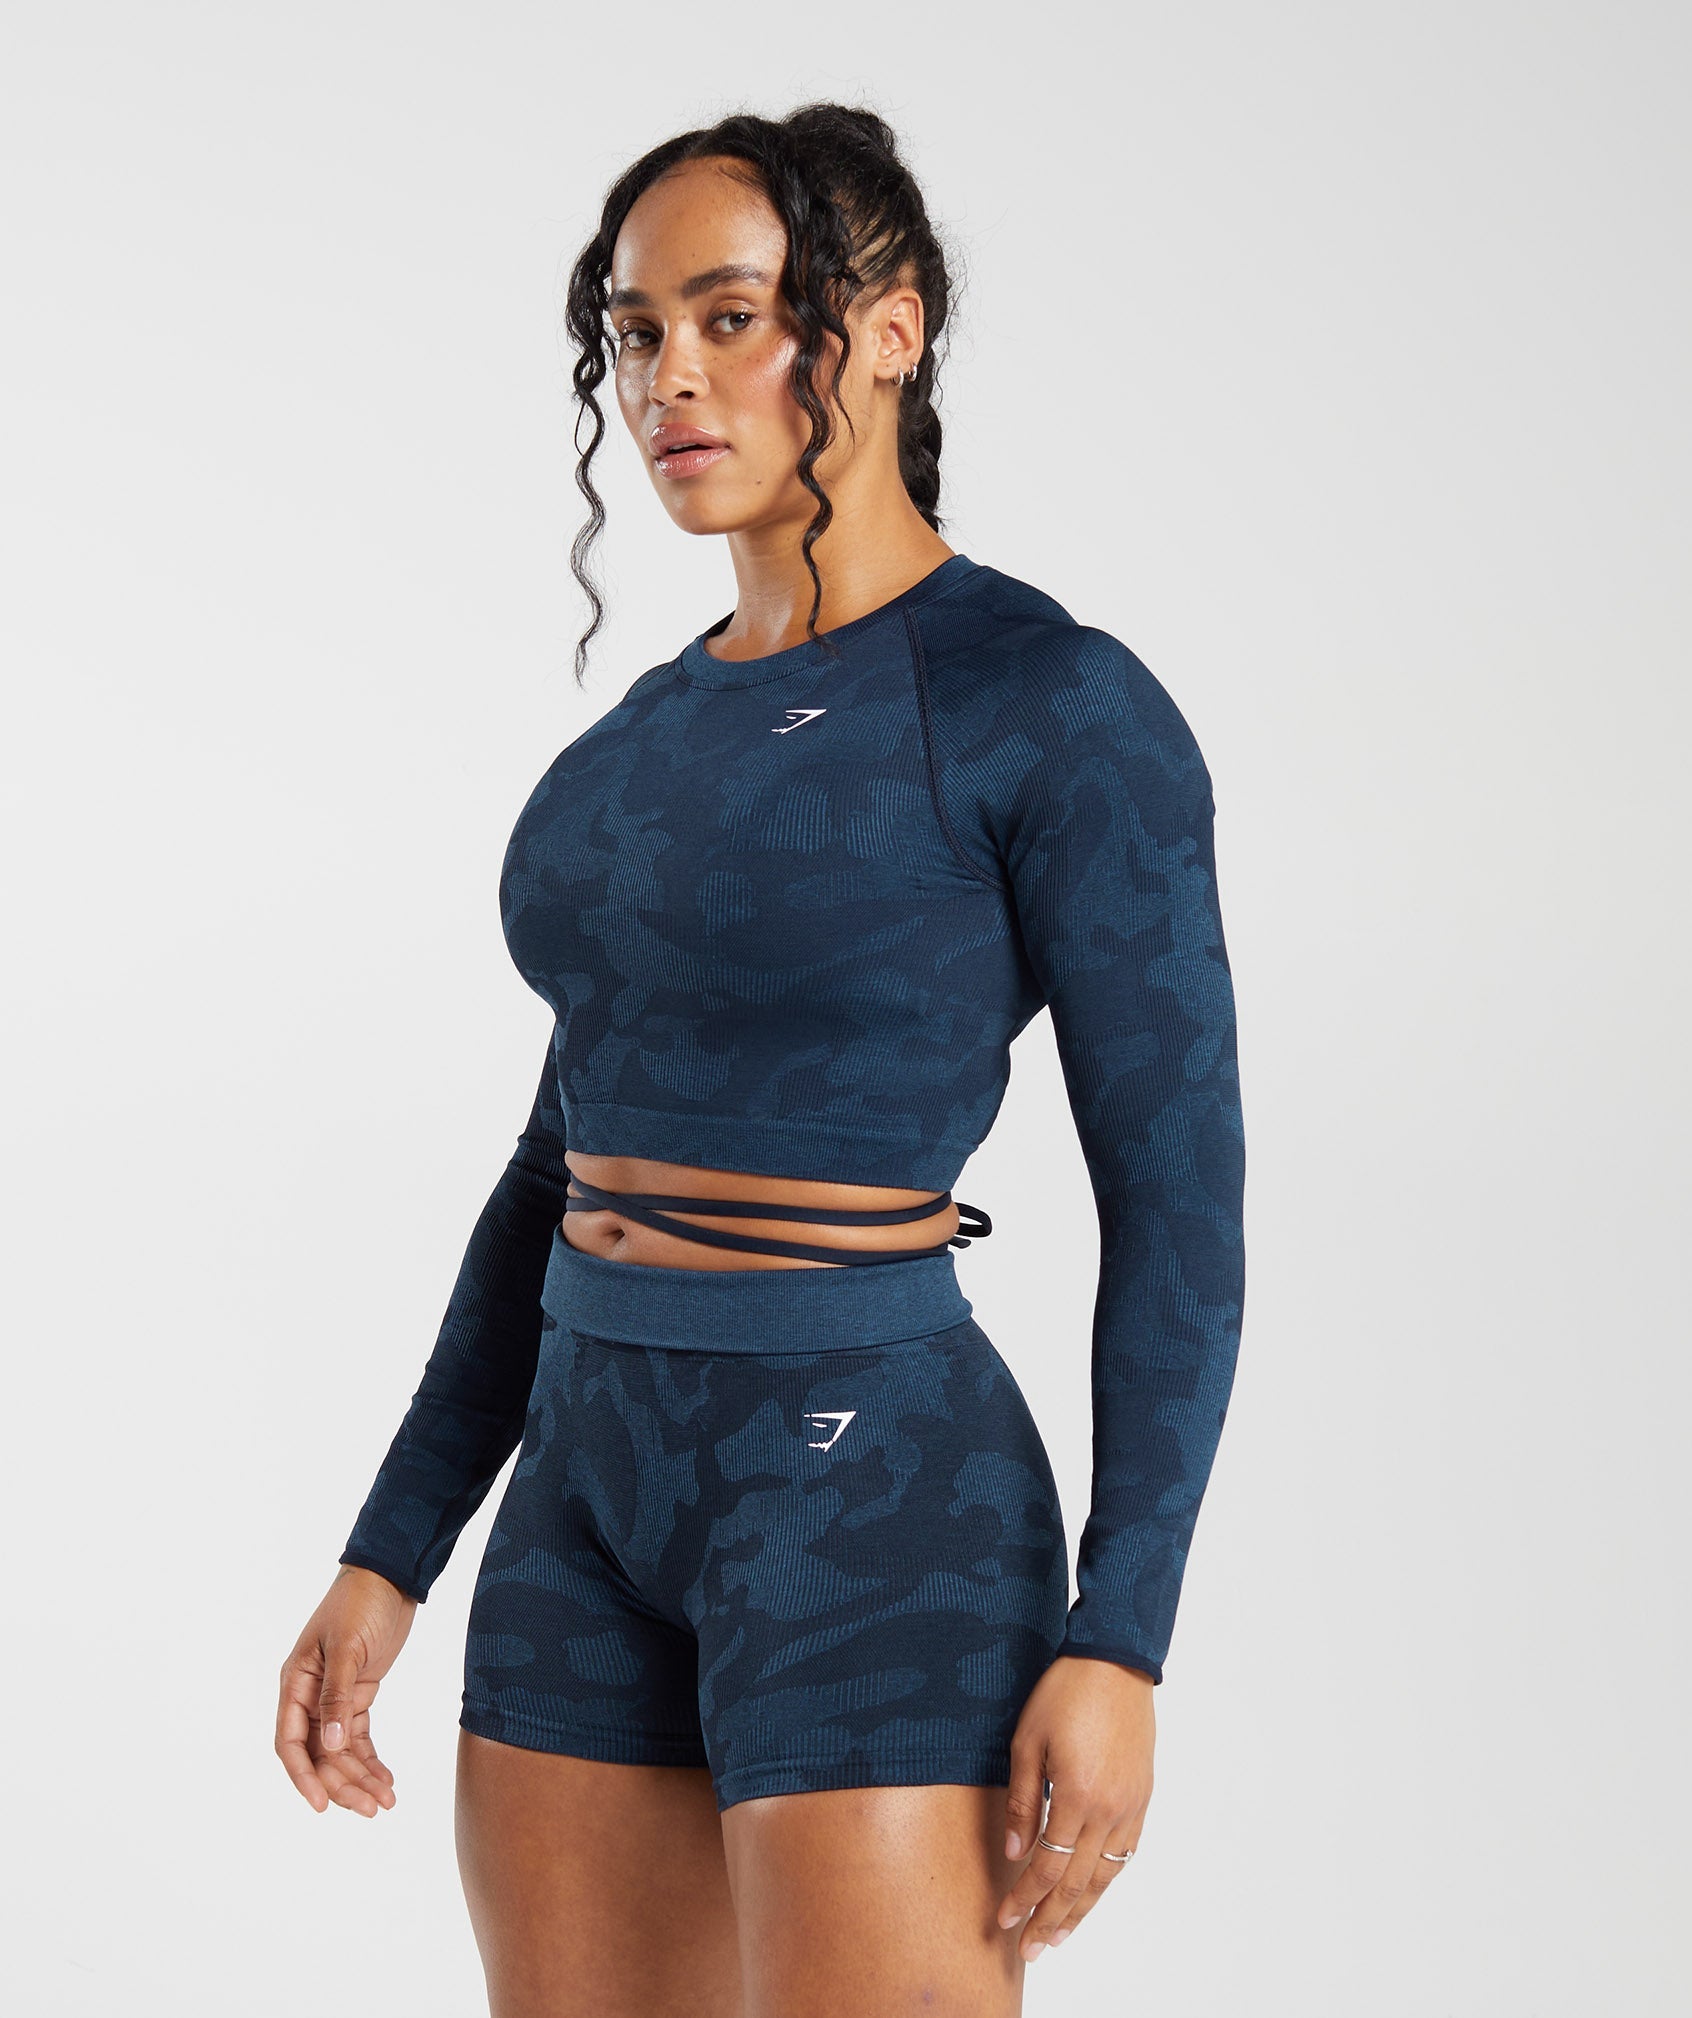 Adapt Camo Seamless Ribbed Long Sleeve Crop Top in Midnight Blue/Ash Blue - view 3